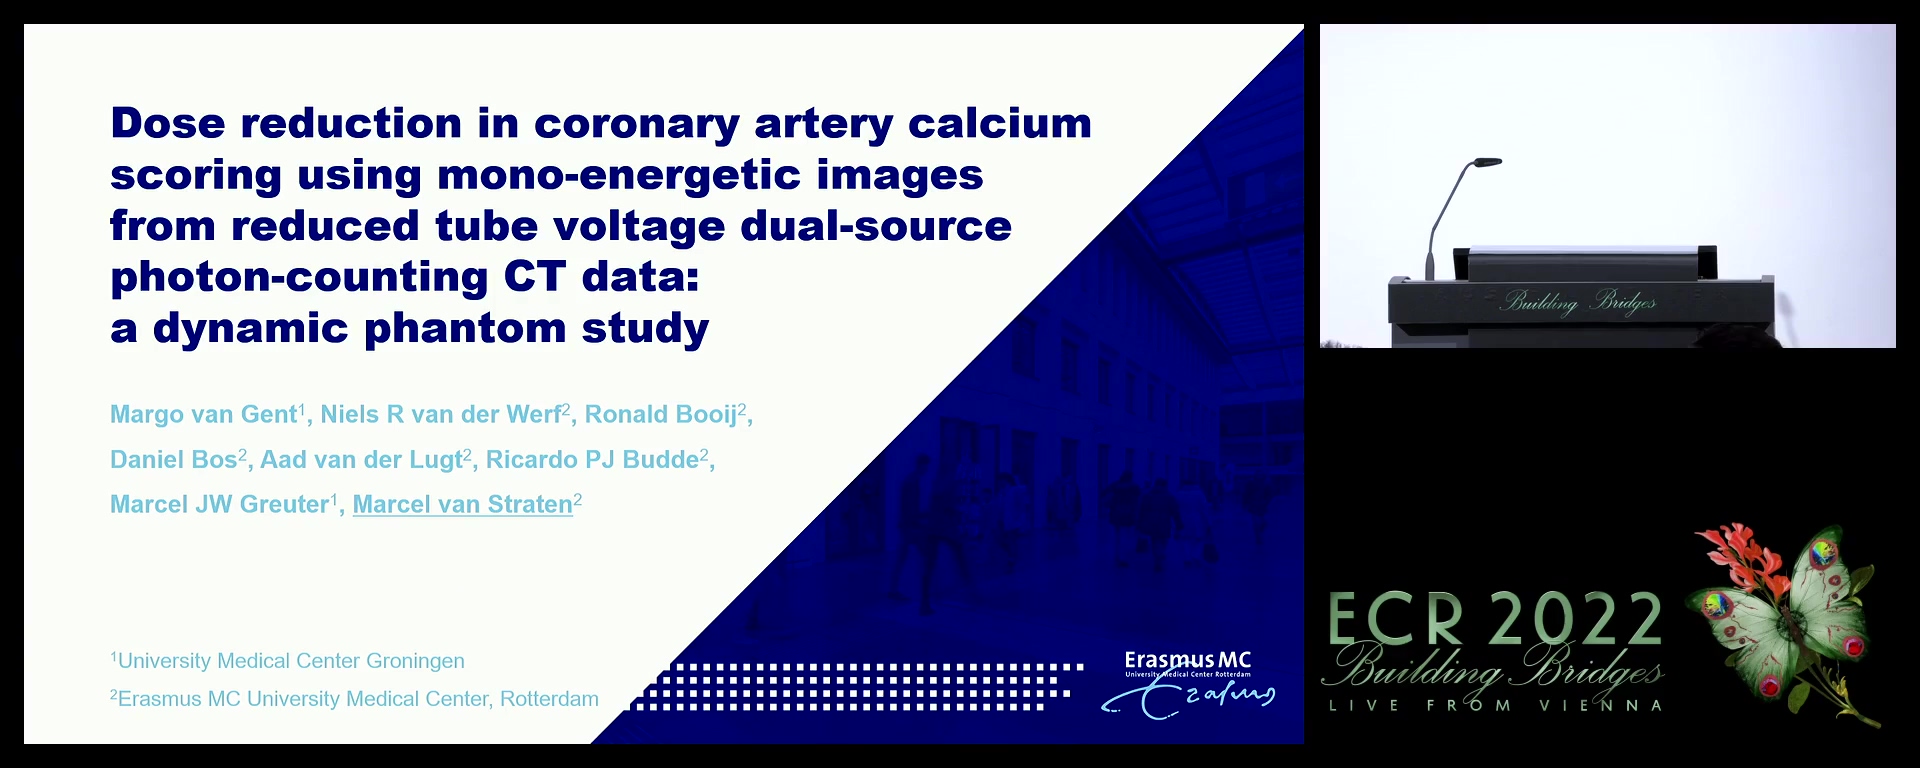 Dose reduction in coronary artery calcium scoring using mono-energetic images from reduced tube voltage dual-source photon-counting CT data: a dynamic phantom study - Marcel van Straten, Rotterdam / NL